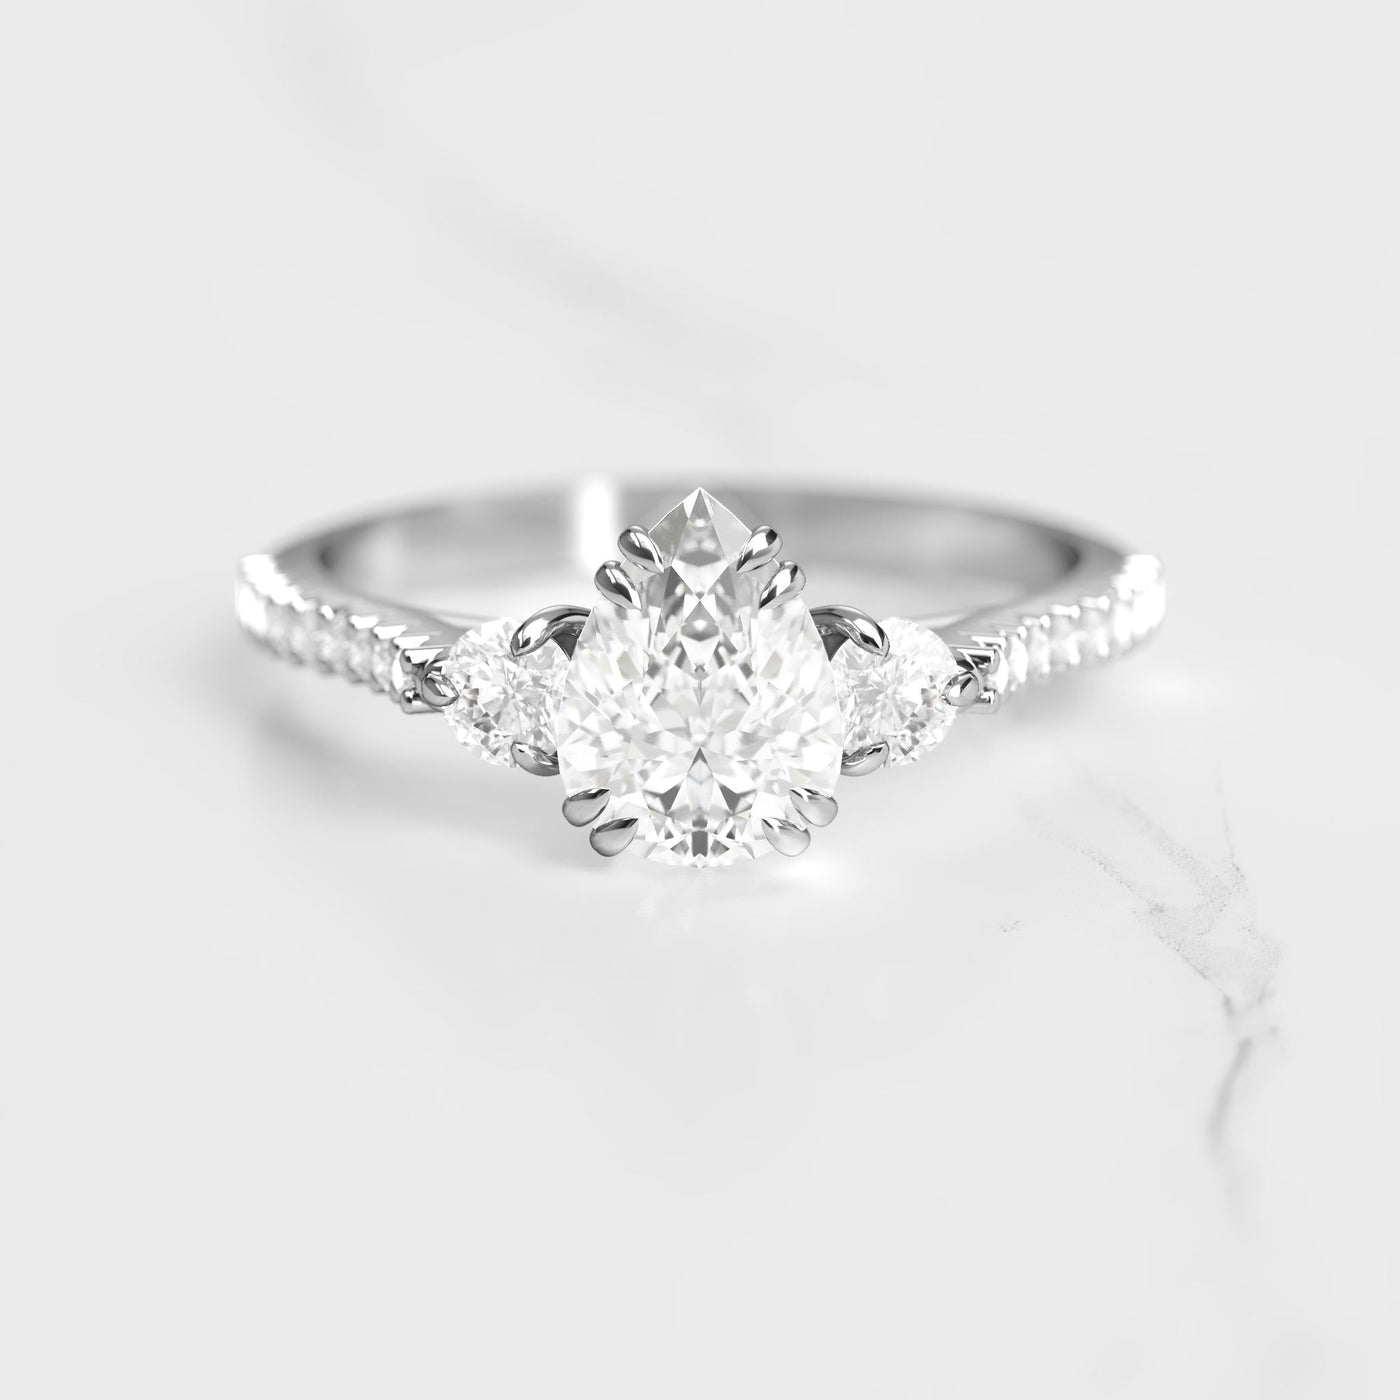 Pear-shaped half pave diamond ring with accent stones